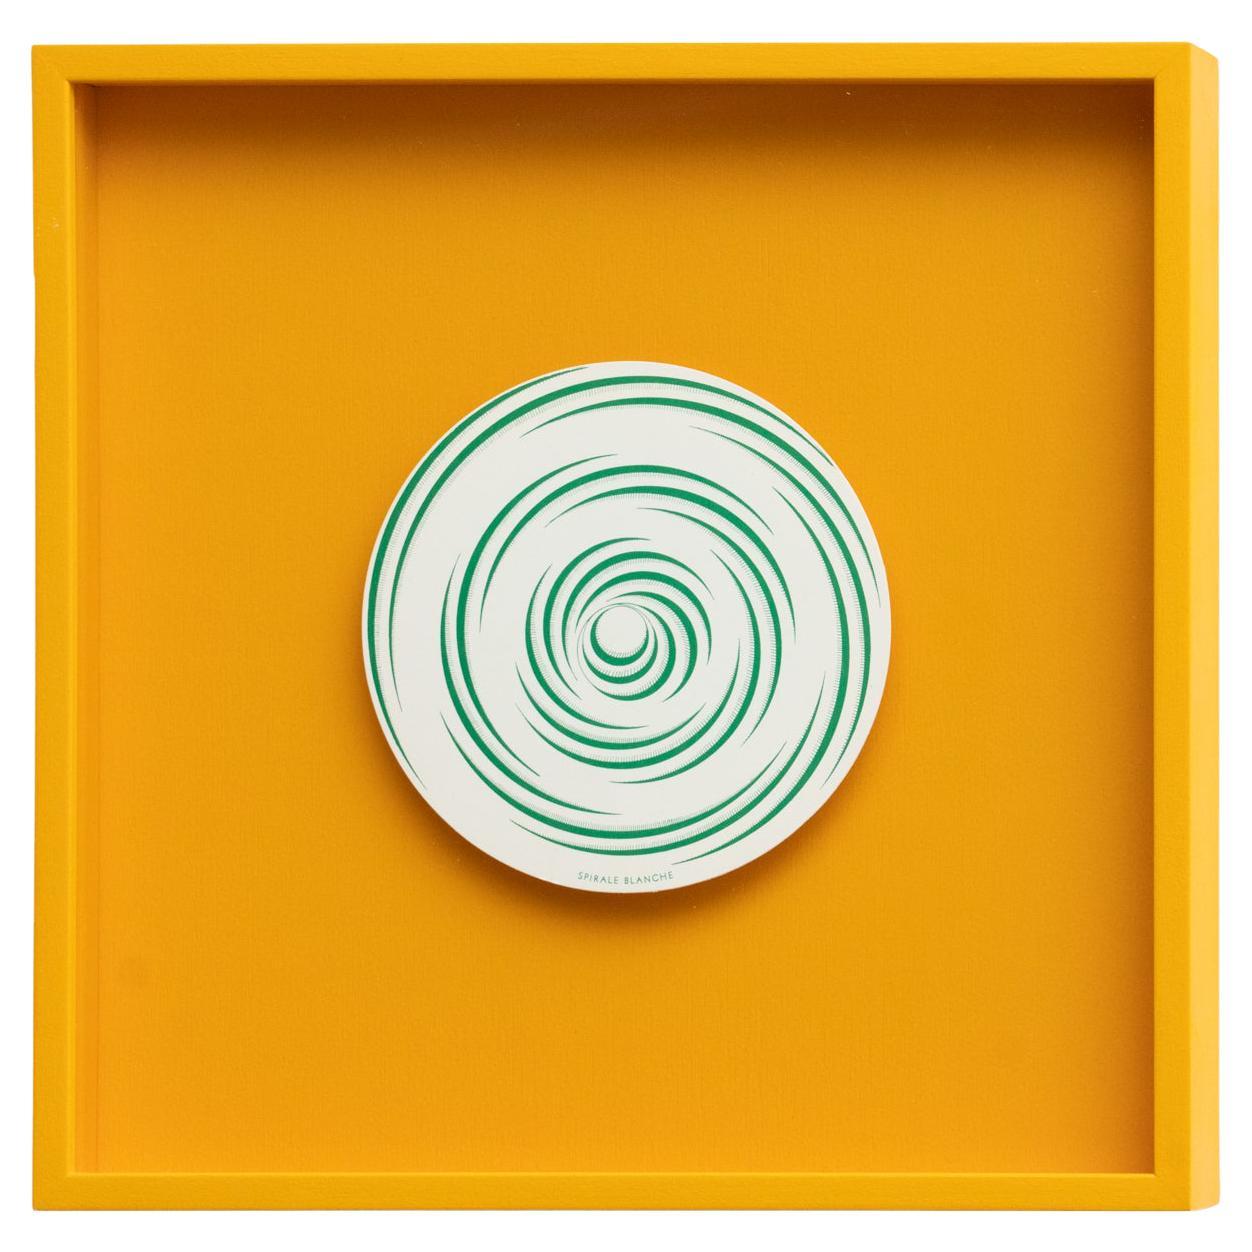 Enter the world of Marcel Duchamp's Rotorelief, a captivating piece from the 1987 Konig Series 133, elegantly framed in high-quality yellow. This particular Rotorelief, aptly named Spirale Blanche, unveils its mesmerizing patterns in shades of green